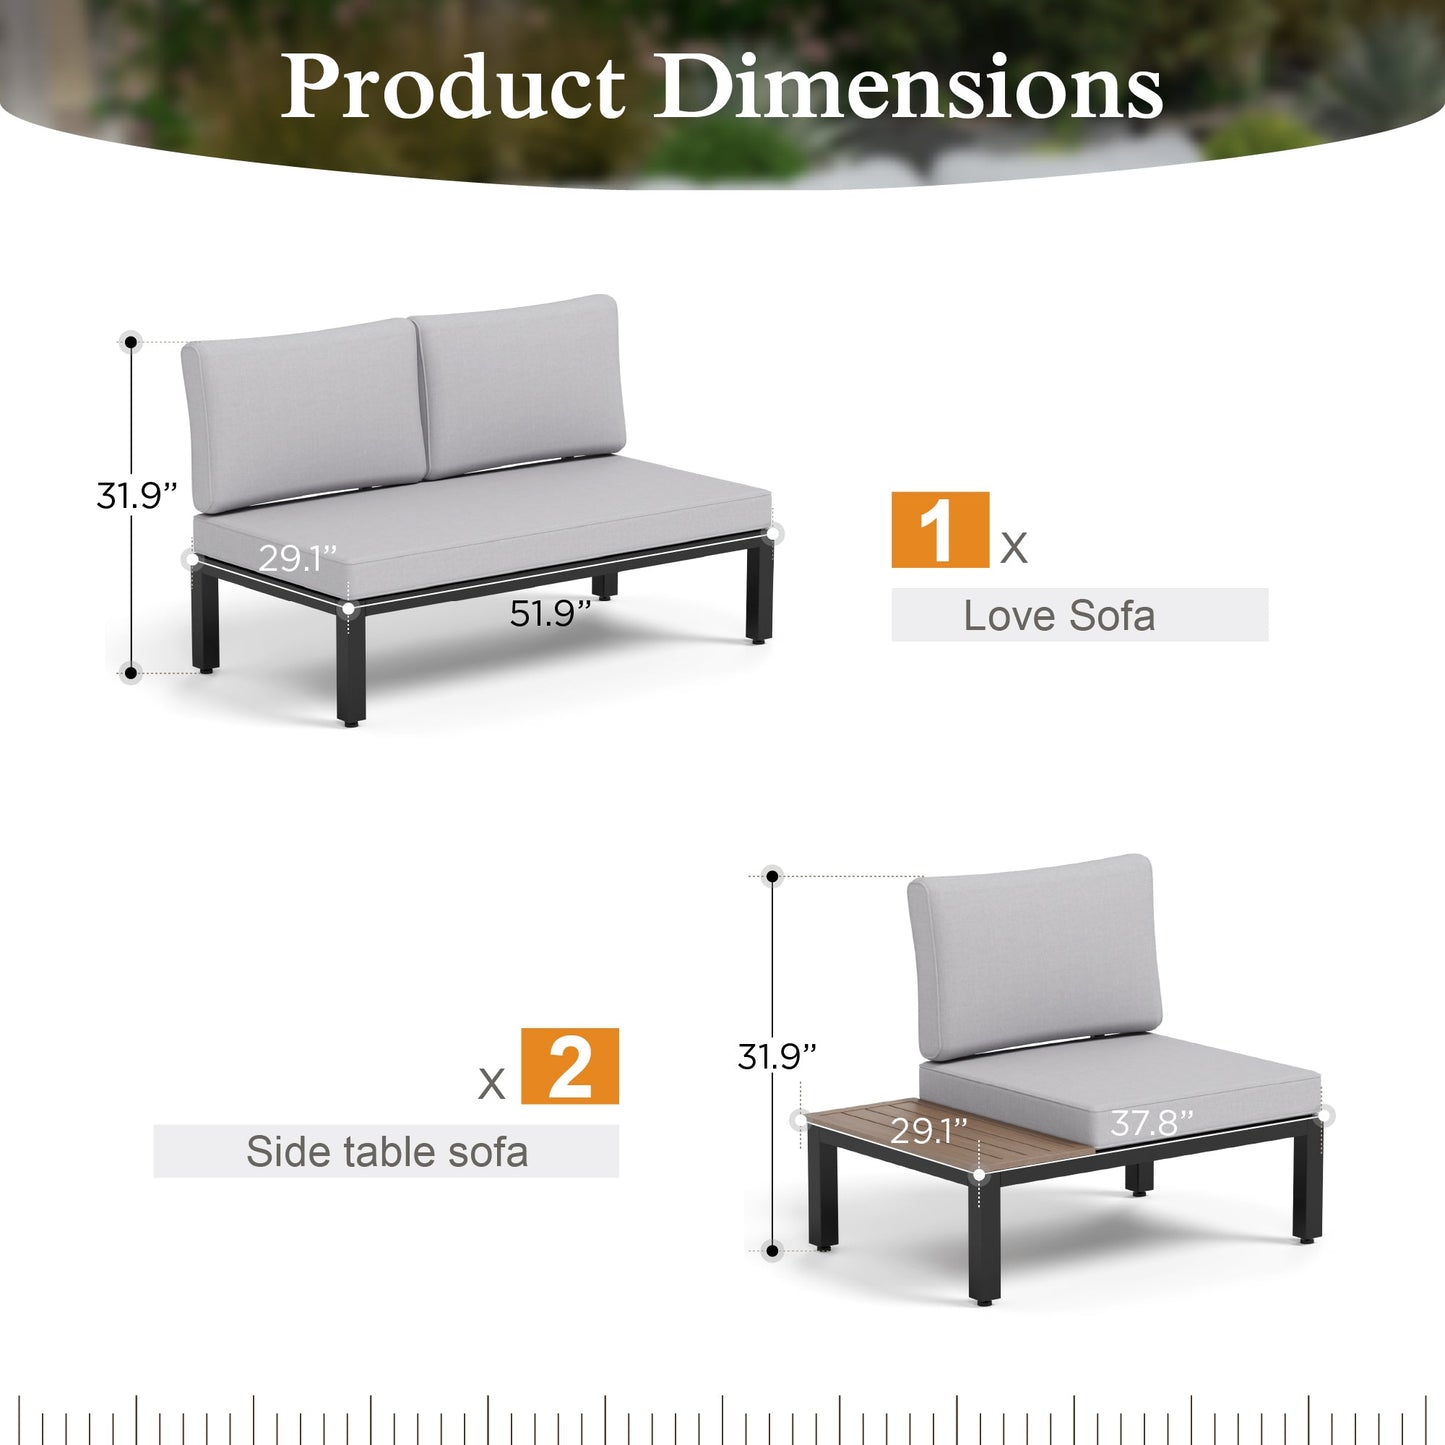 Sophia & William 3 Pieces Metal Patio Furniture Conversation Set with 2Pcs Side Table Sofa, 1Pc Loveseat Sofa, and 1Pc Coffee Table, Light Grey